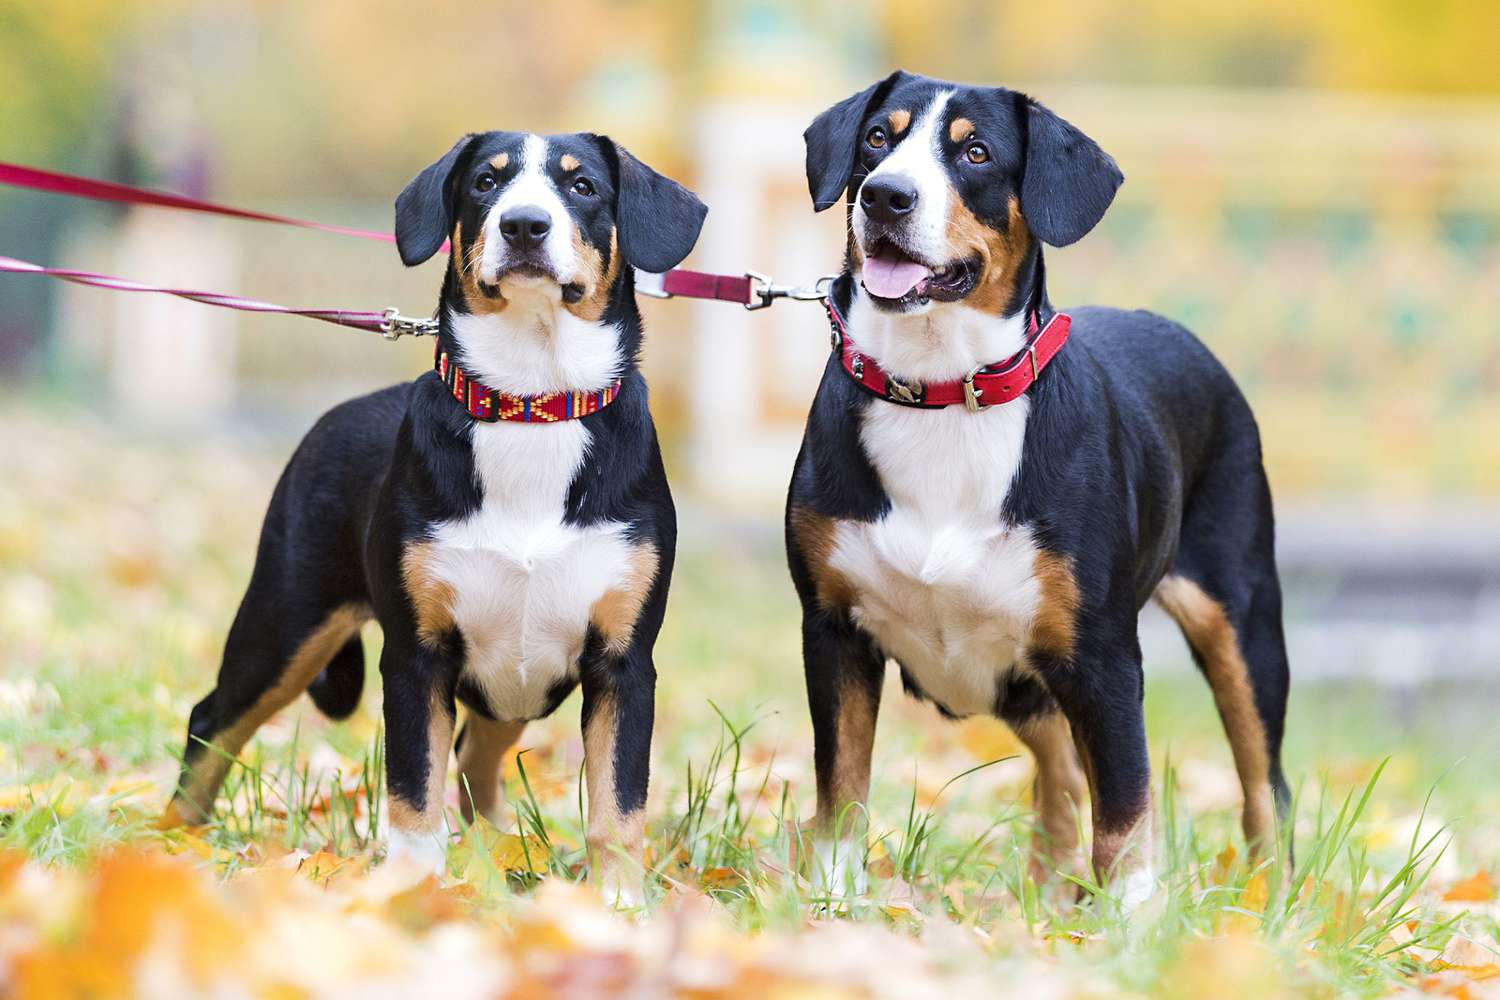 two Entlebucher mountain dogs standing together